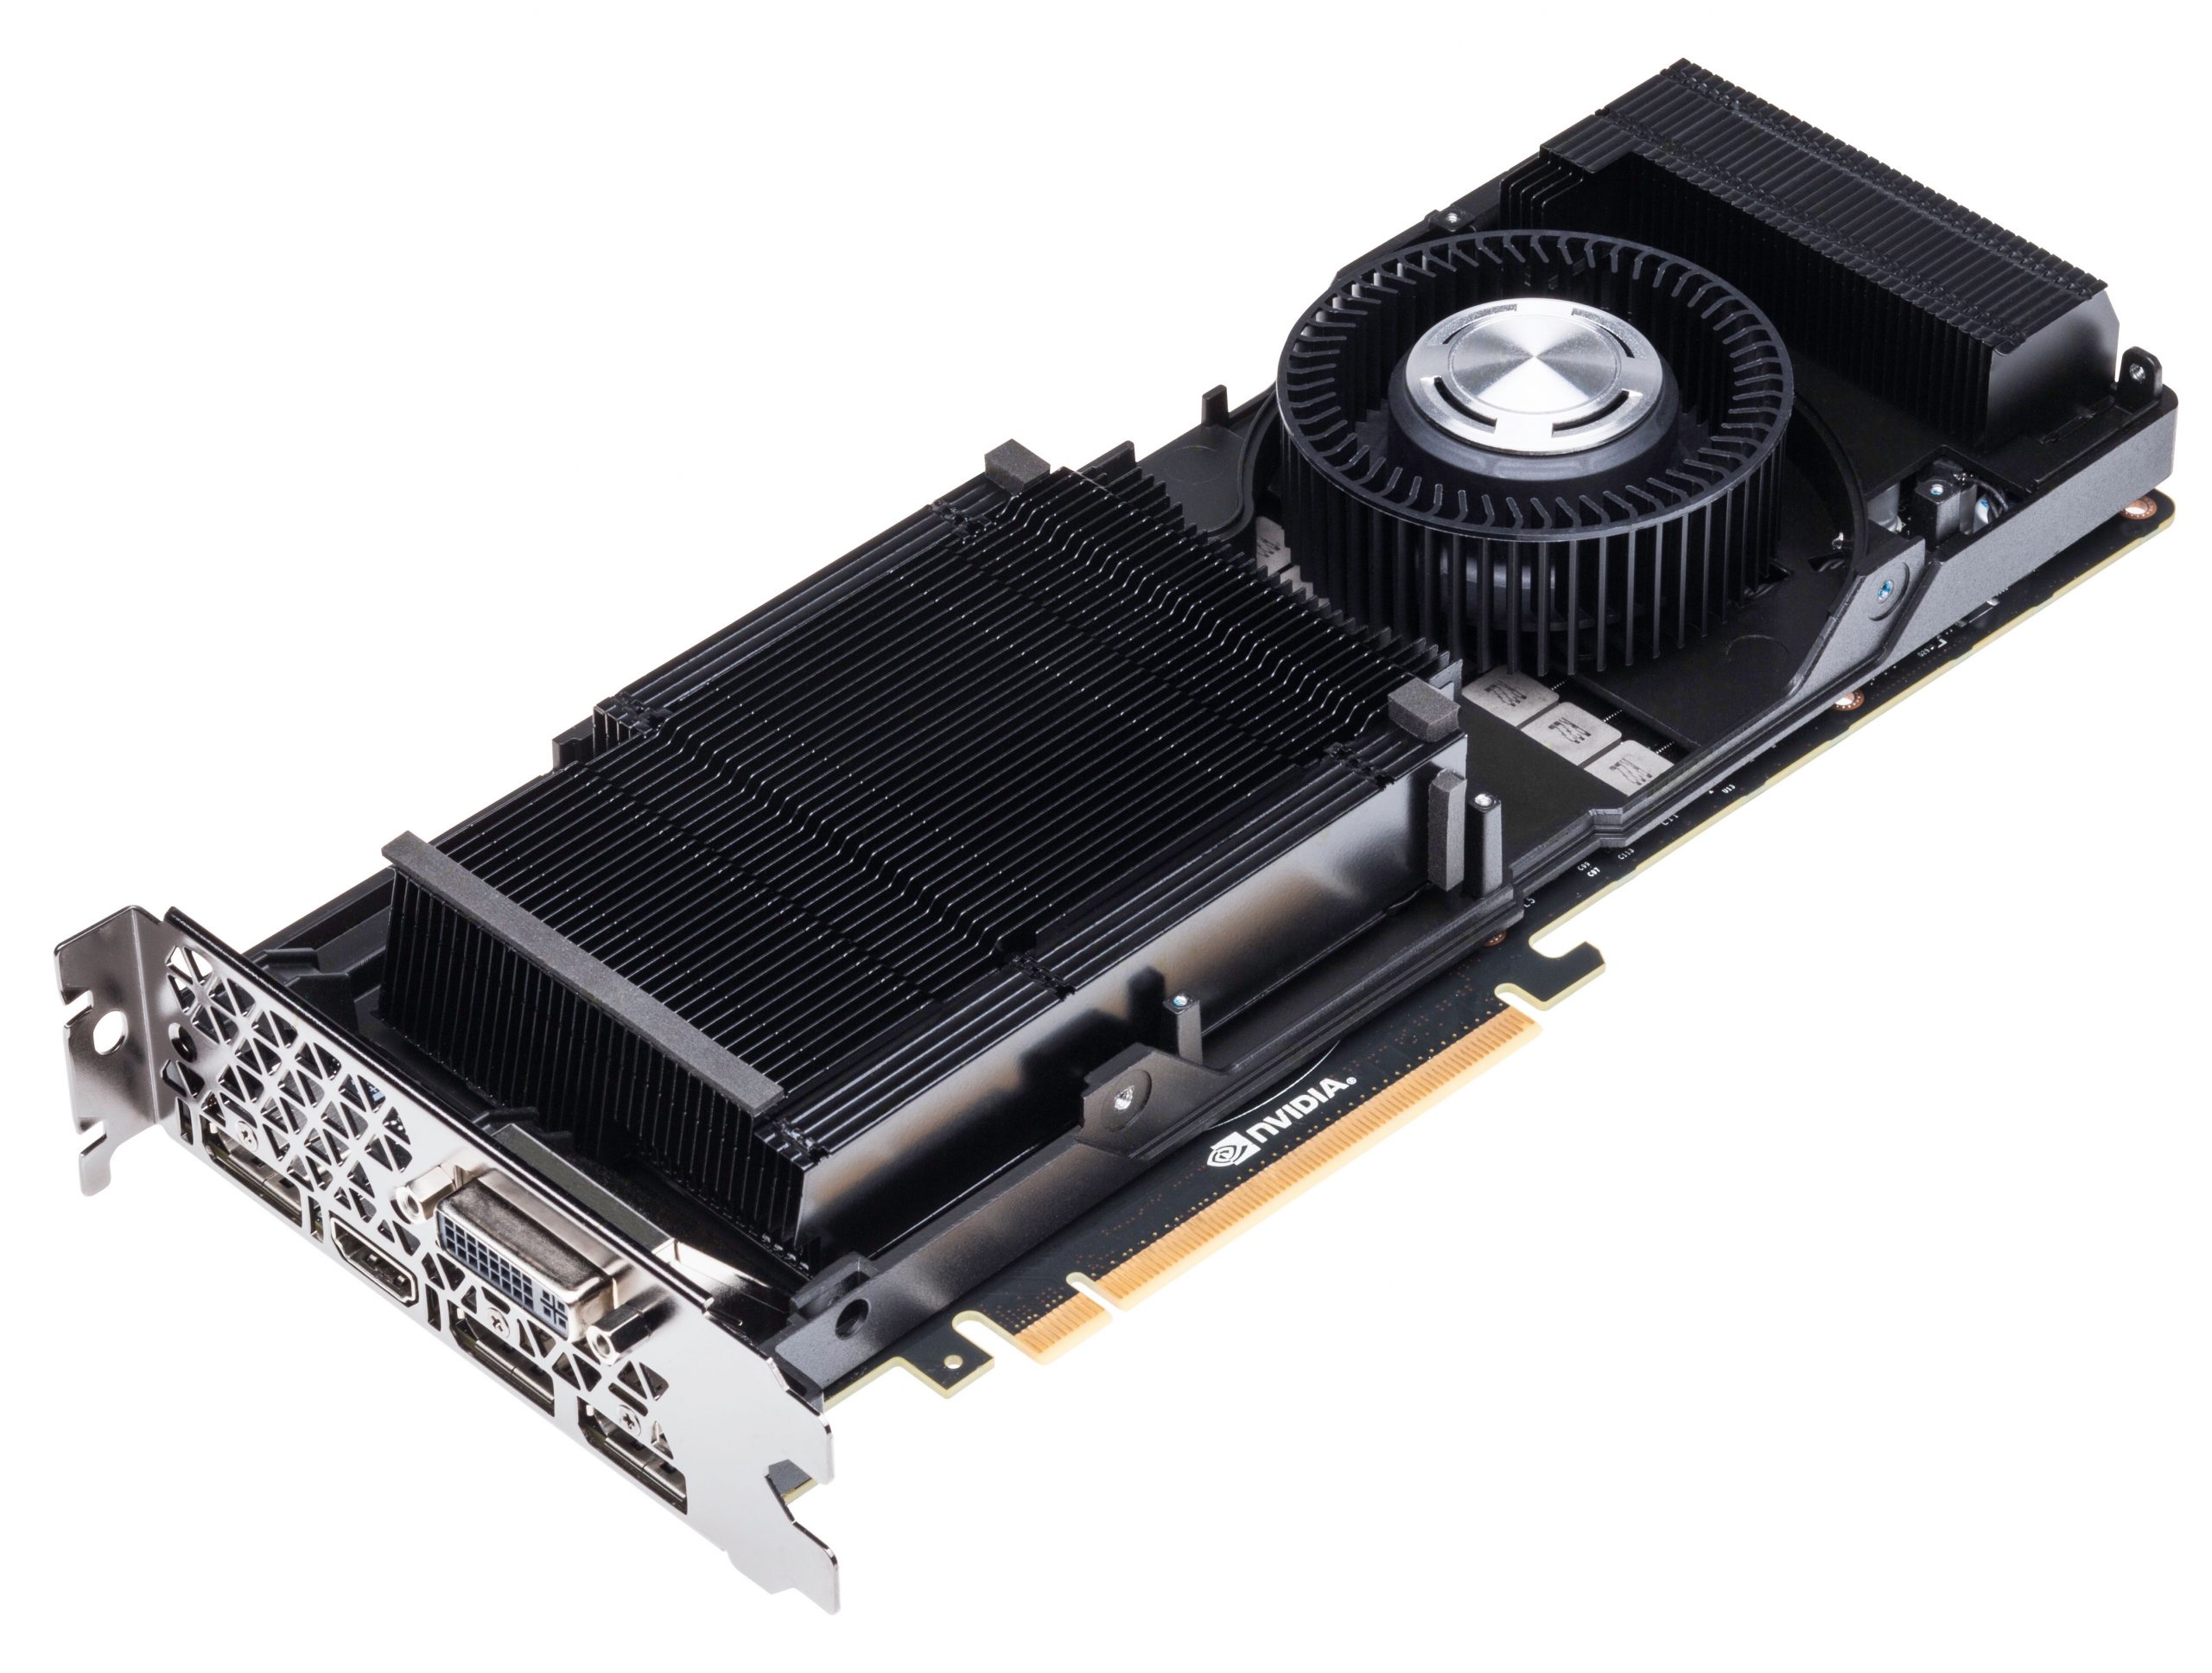 The Gtx 980 Ti Arrives As Nvidia New Flagship Page 2 Of 5 with sizing 4481 X 3389